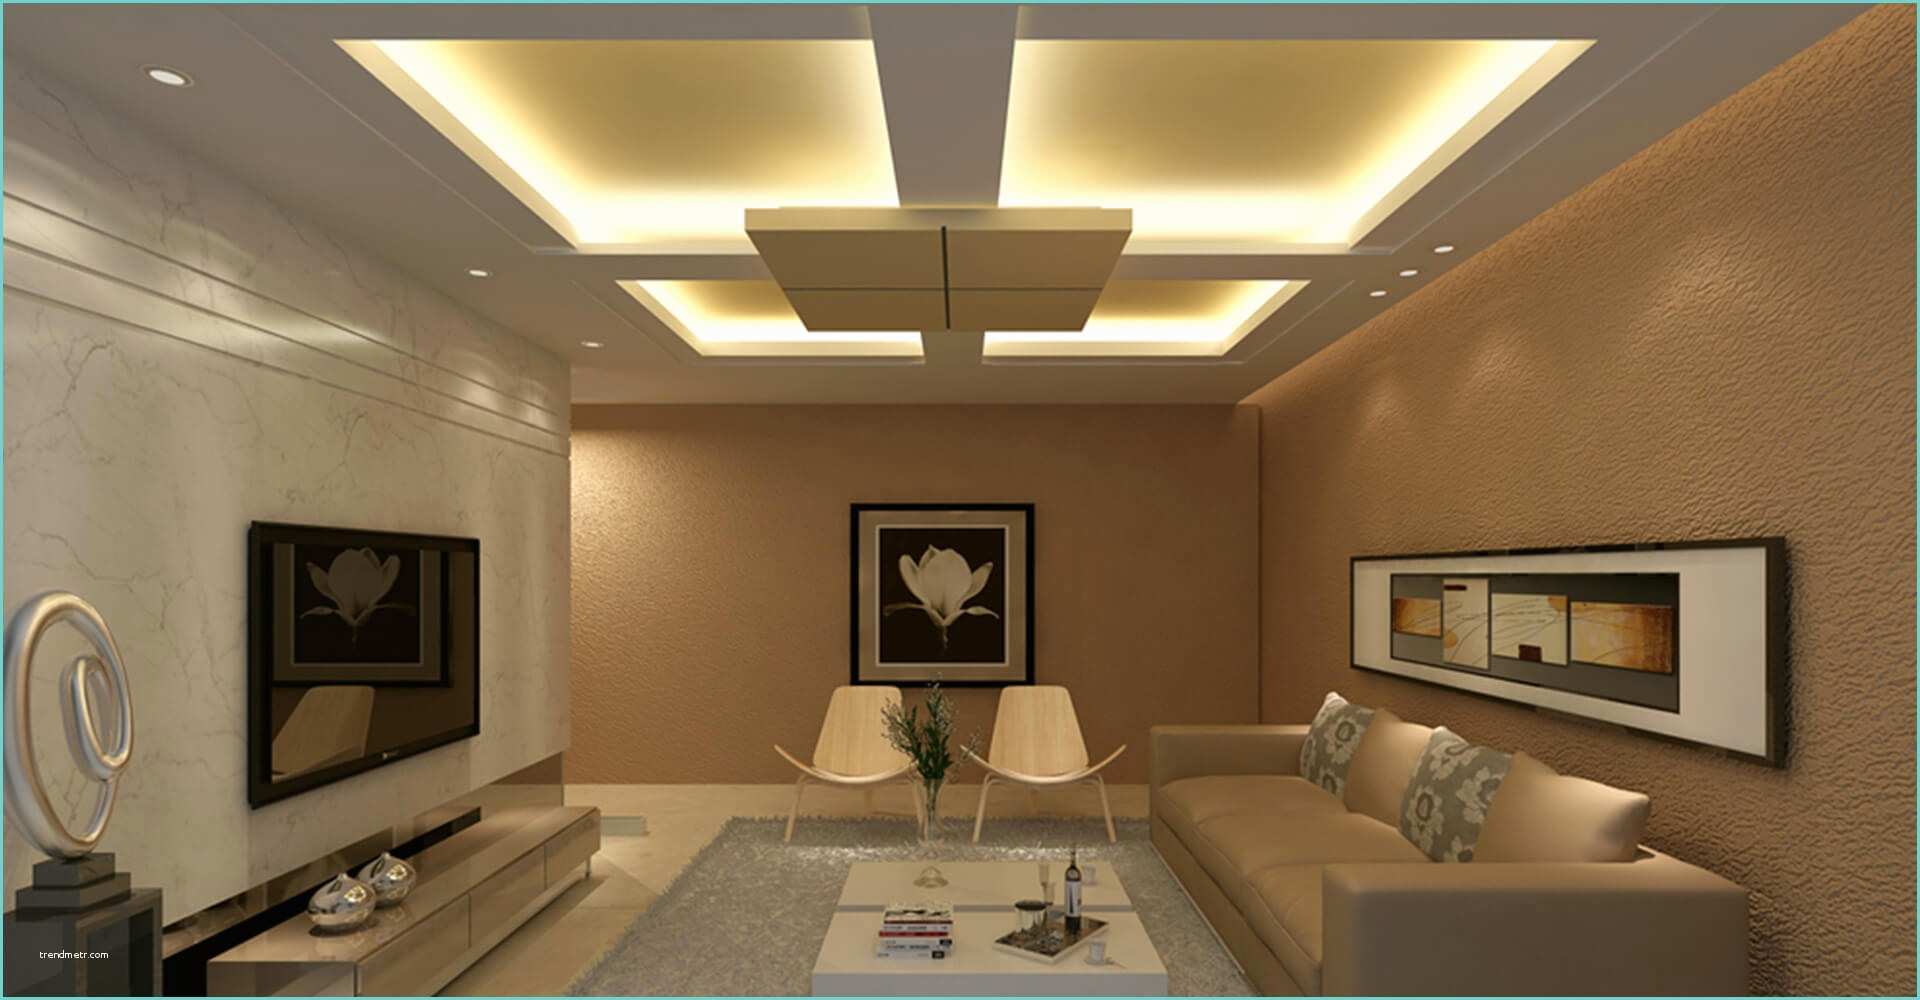 Pop Designs for Ceiling Residential Building Residential False Ceiling False Ceiling